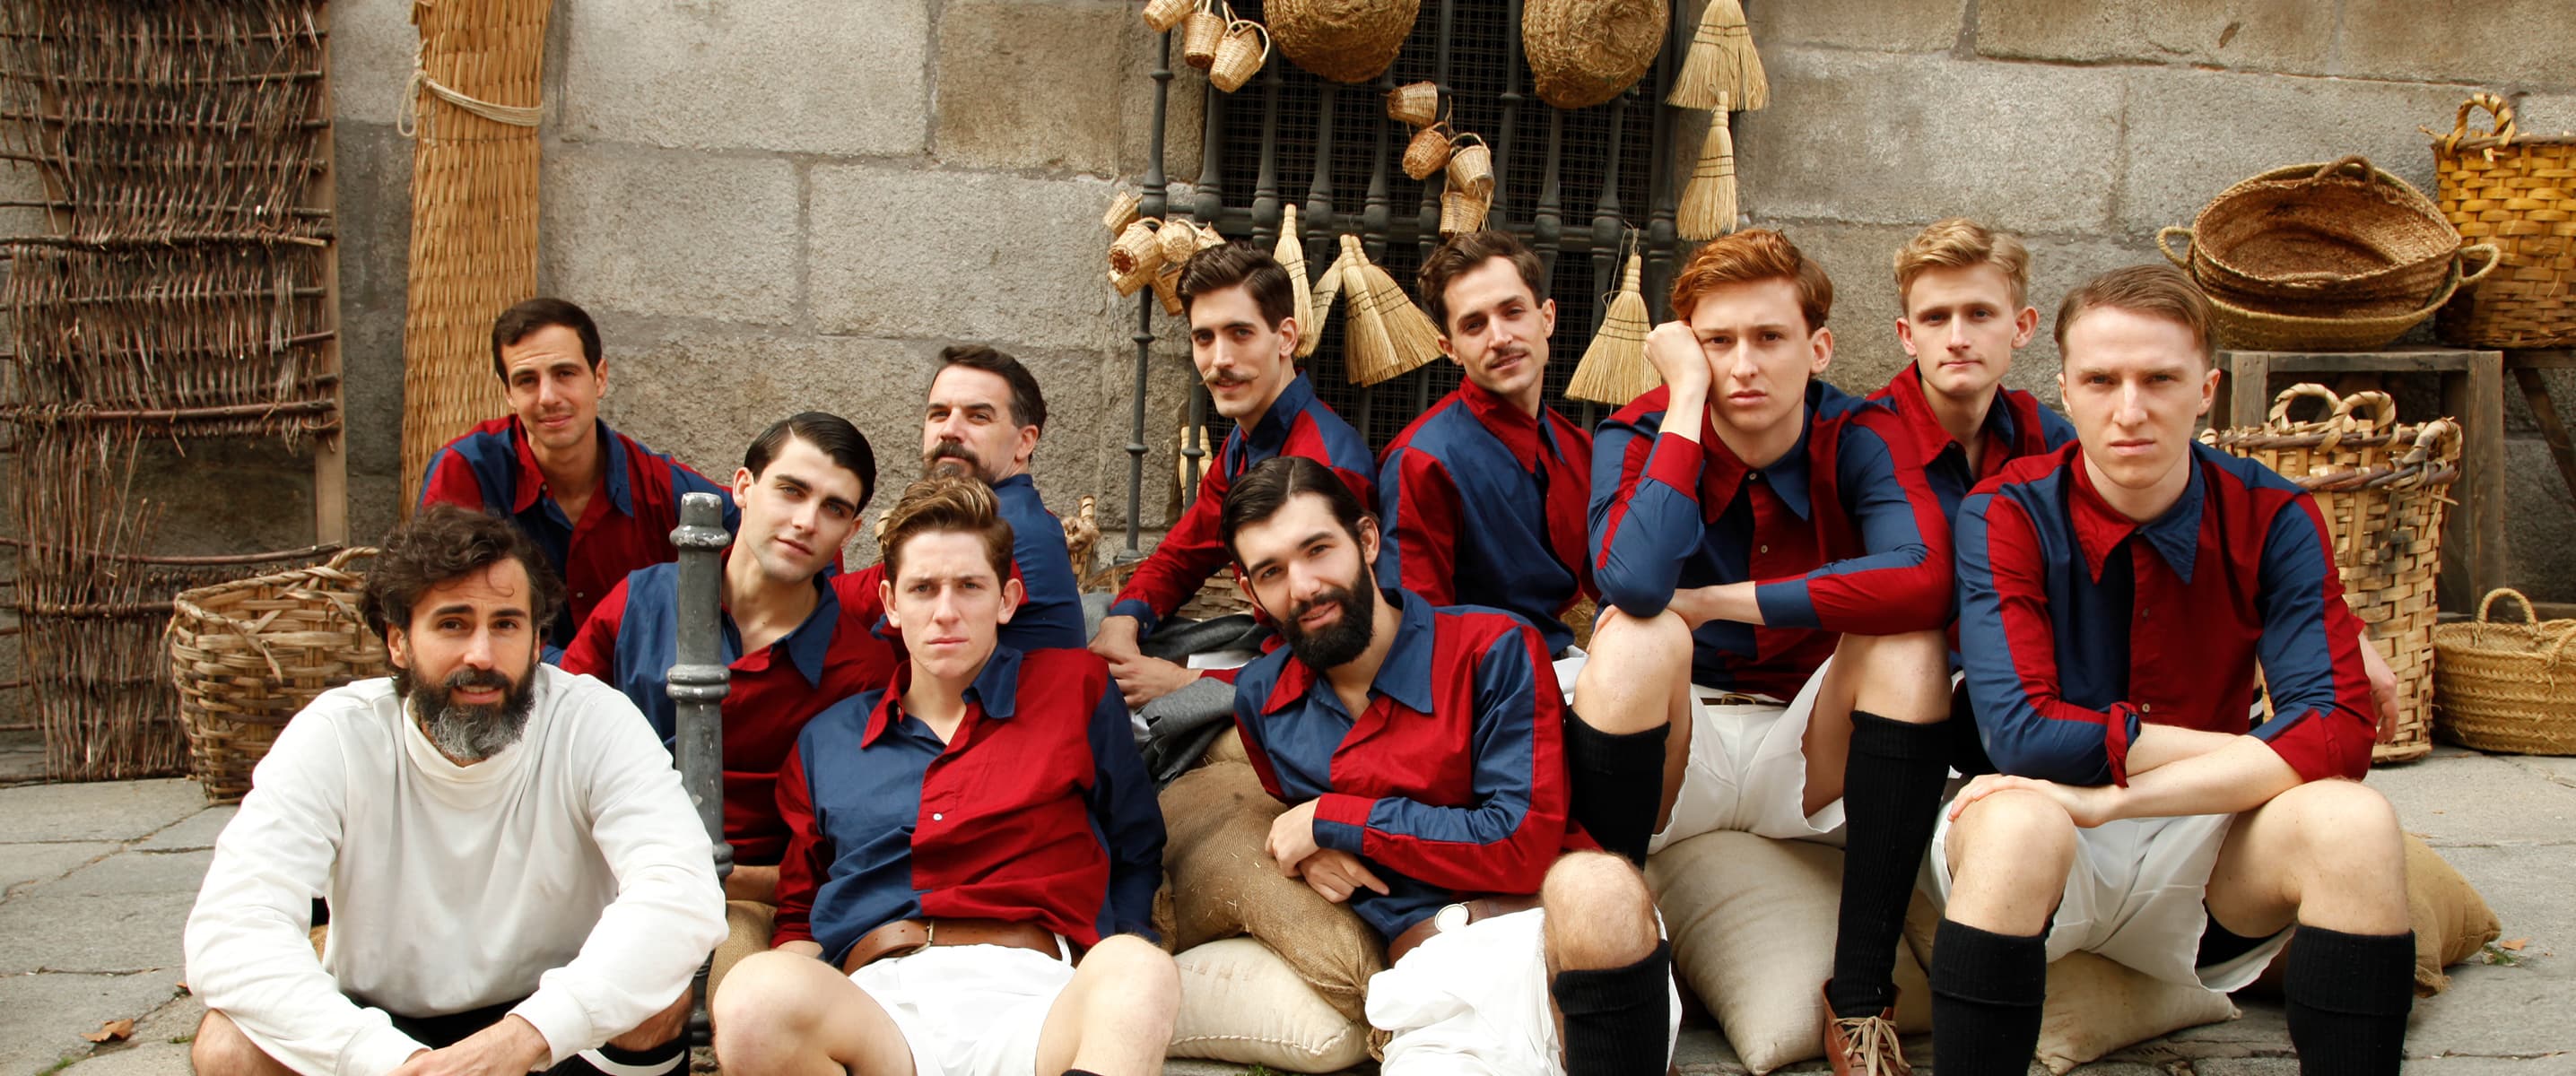 The FC Barcelona players from the short movie, “El Clásico”.